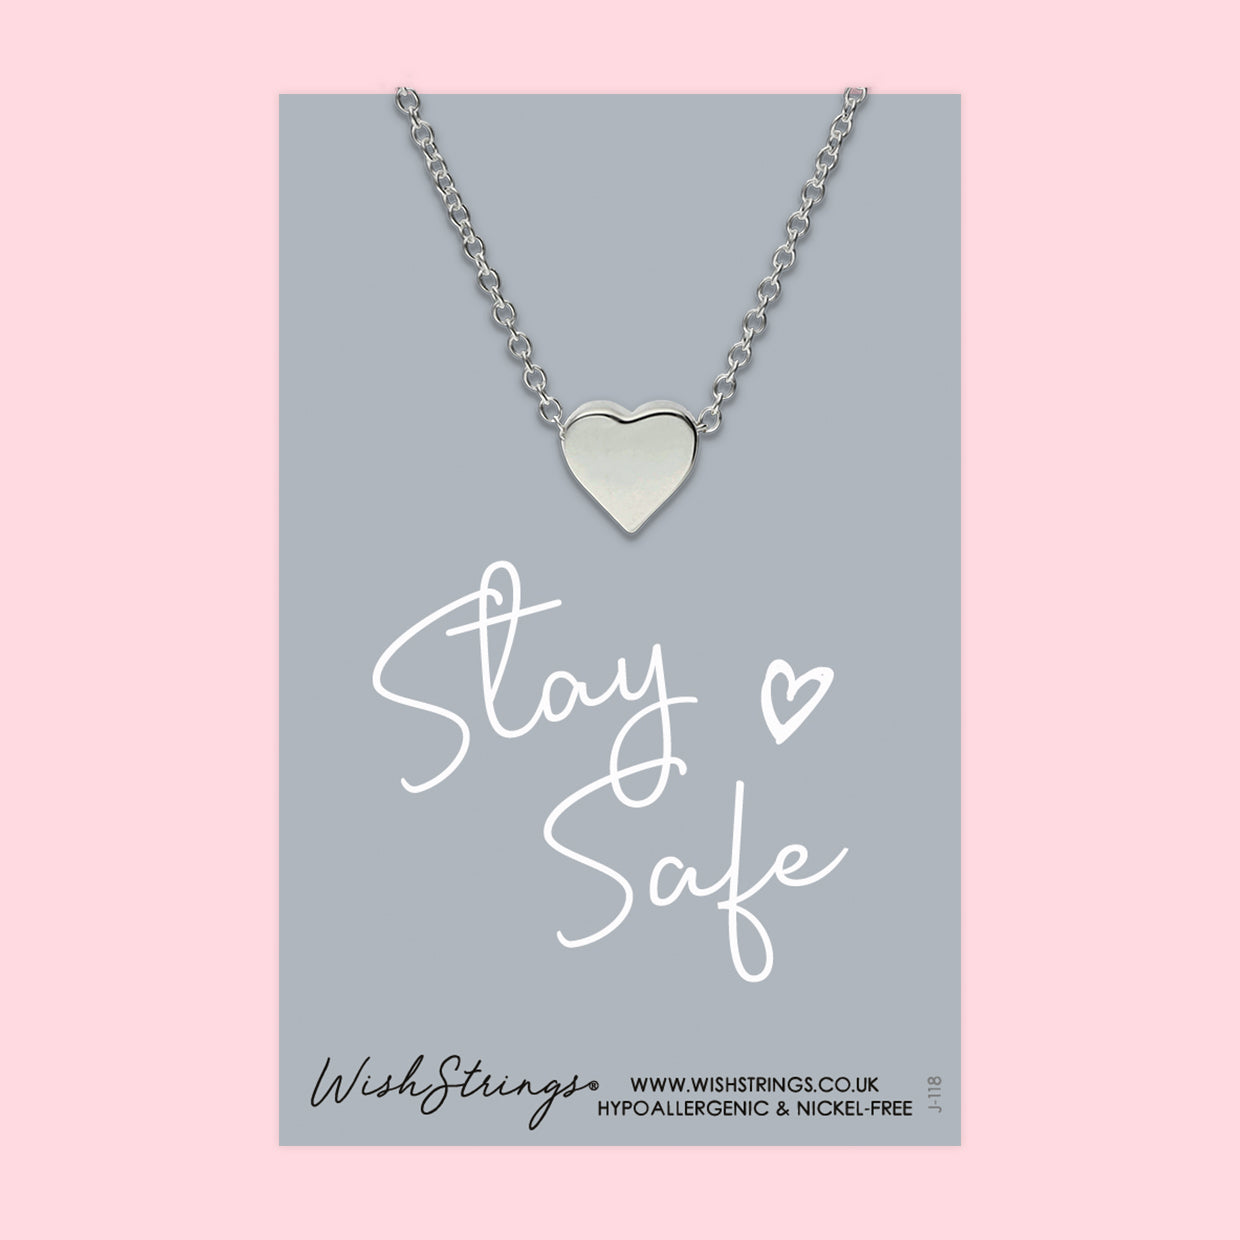 Stay Safe - Heart Necklace